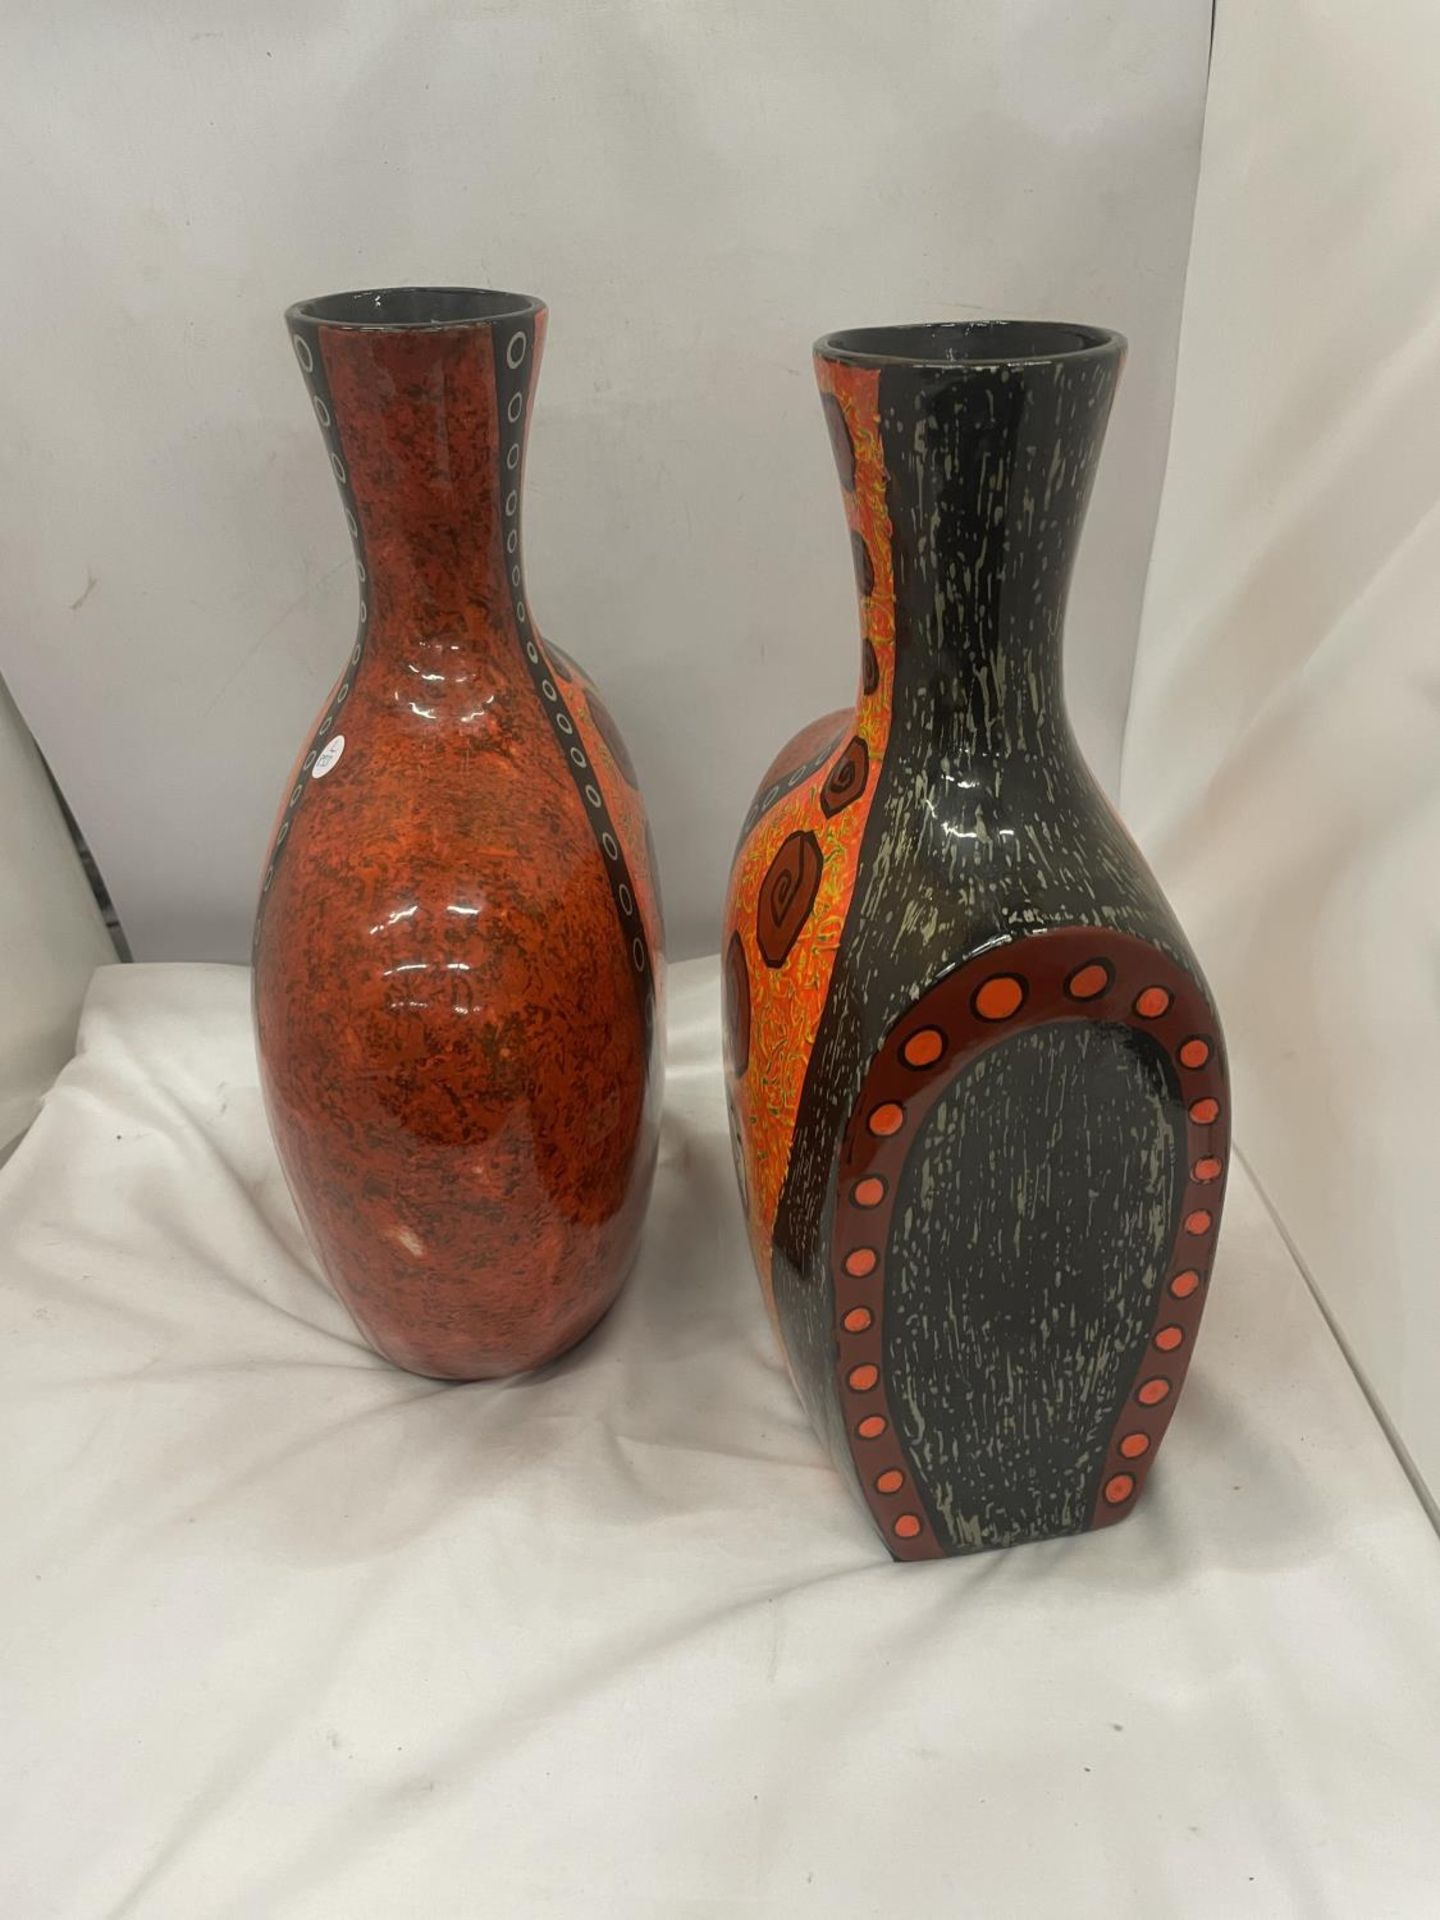 A PAIR OF TALL STUDIO POTTERY VASES - Image 6 of 6